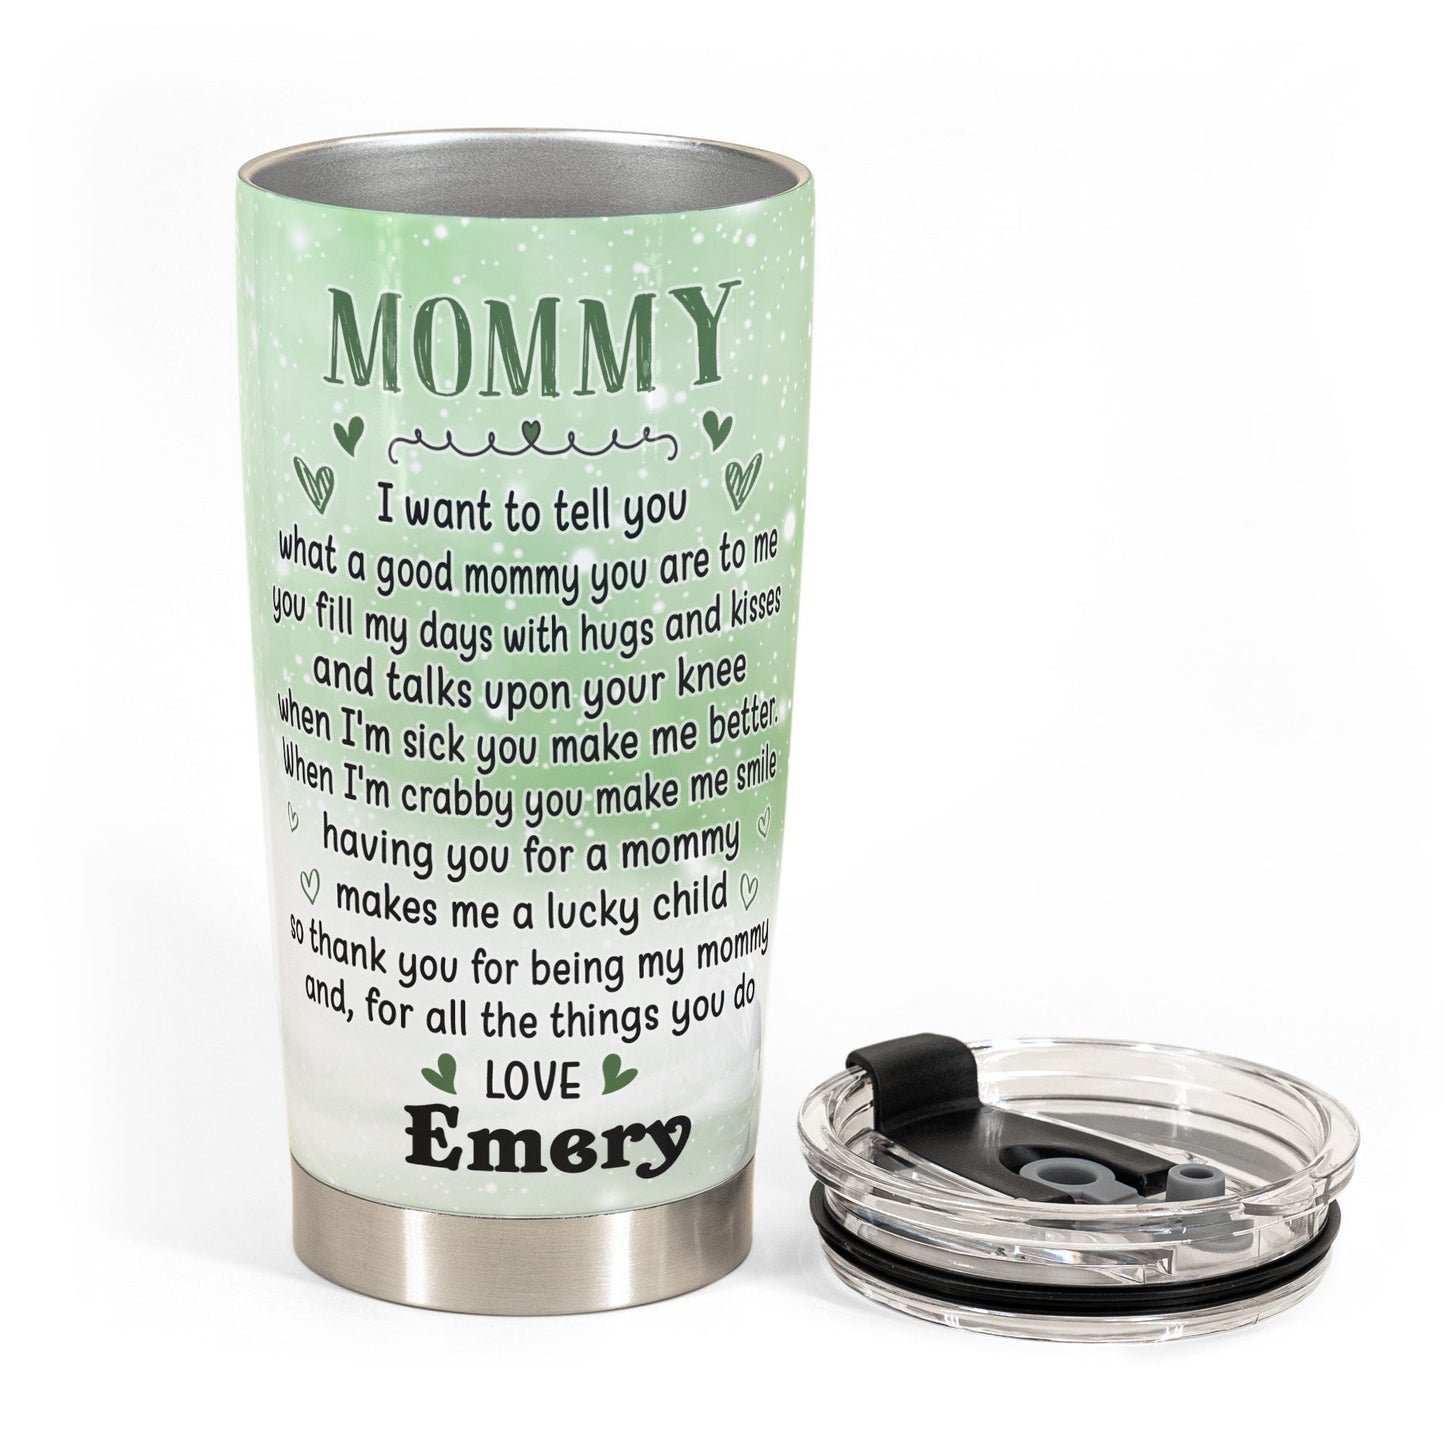 What A Good Mommy You Are - Personalized Tumbler Cup - Gift For Mom